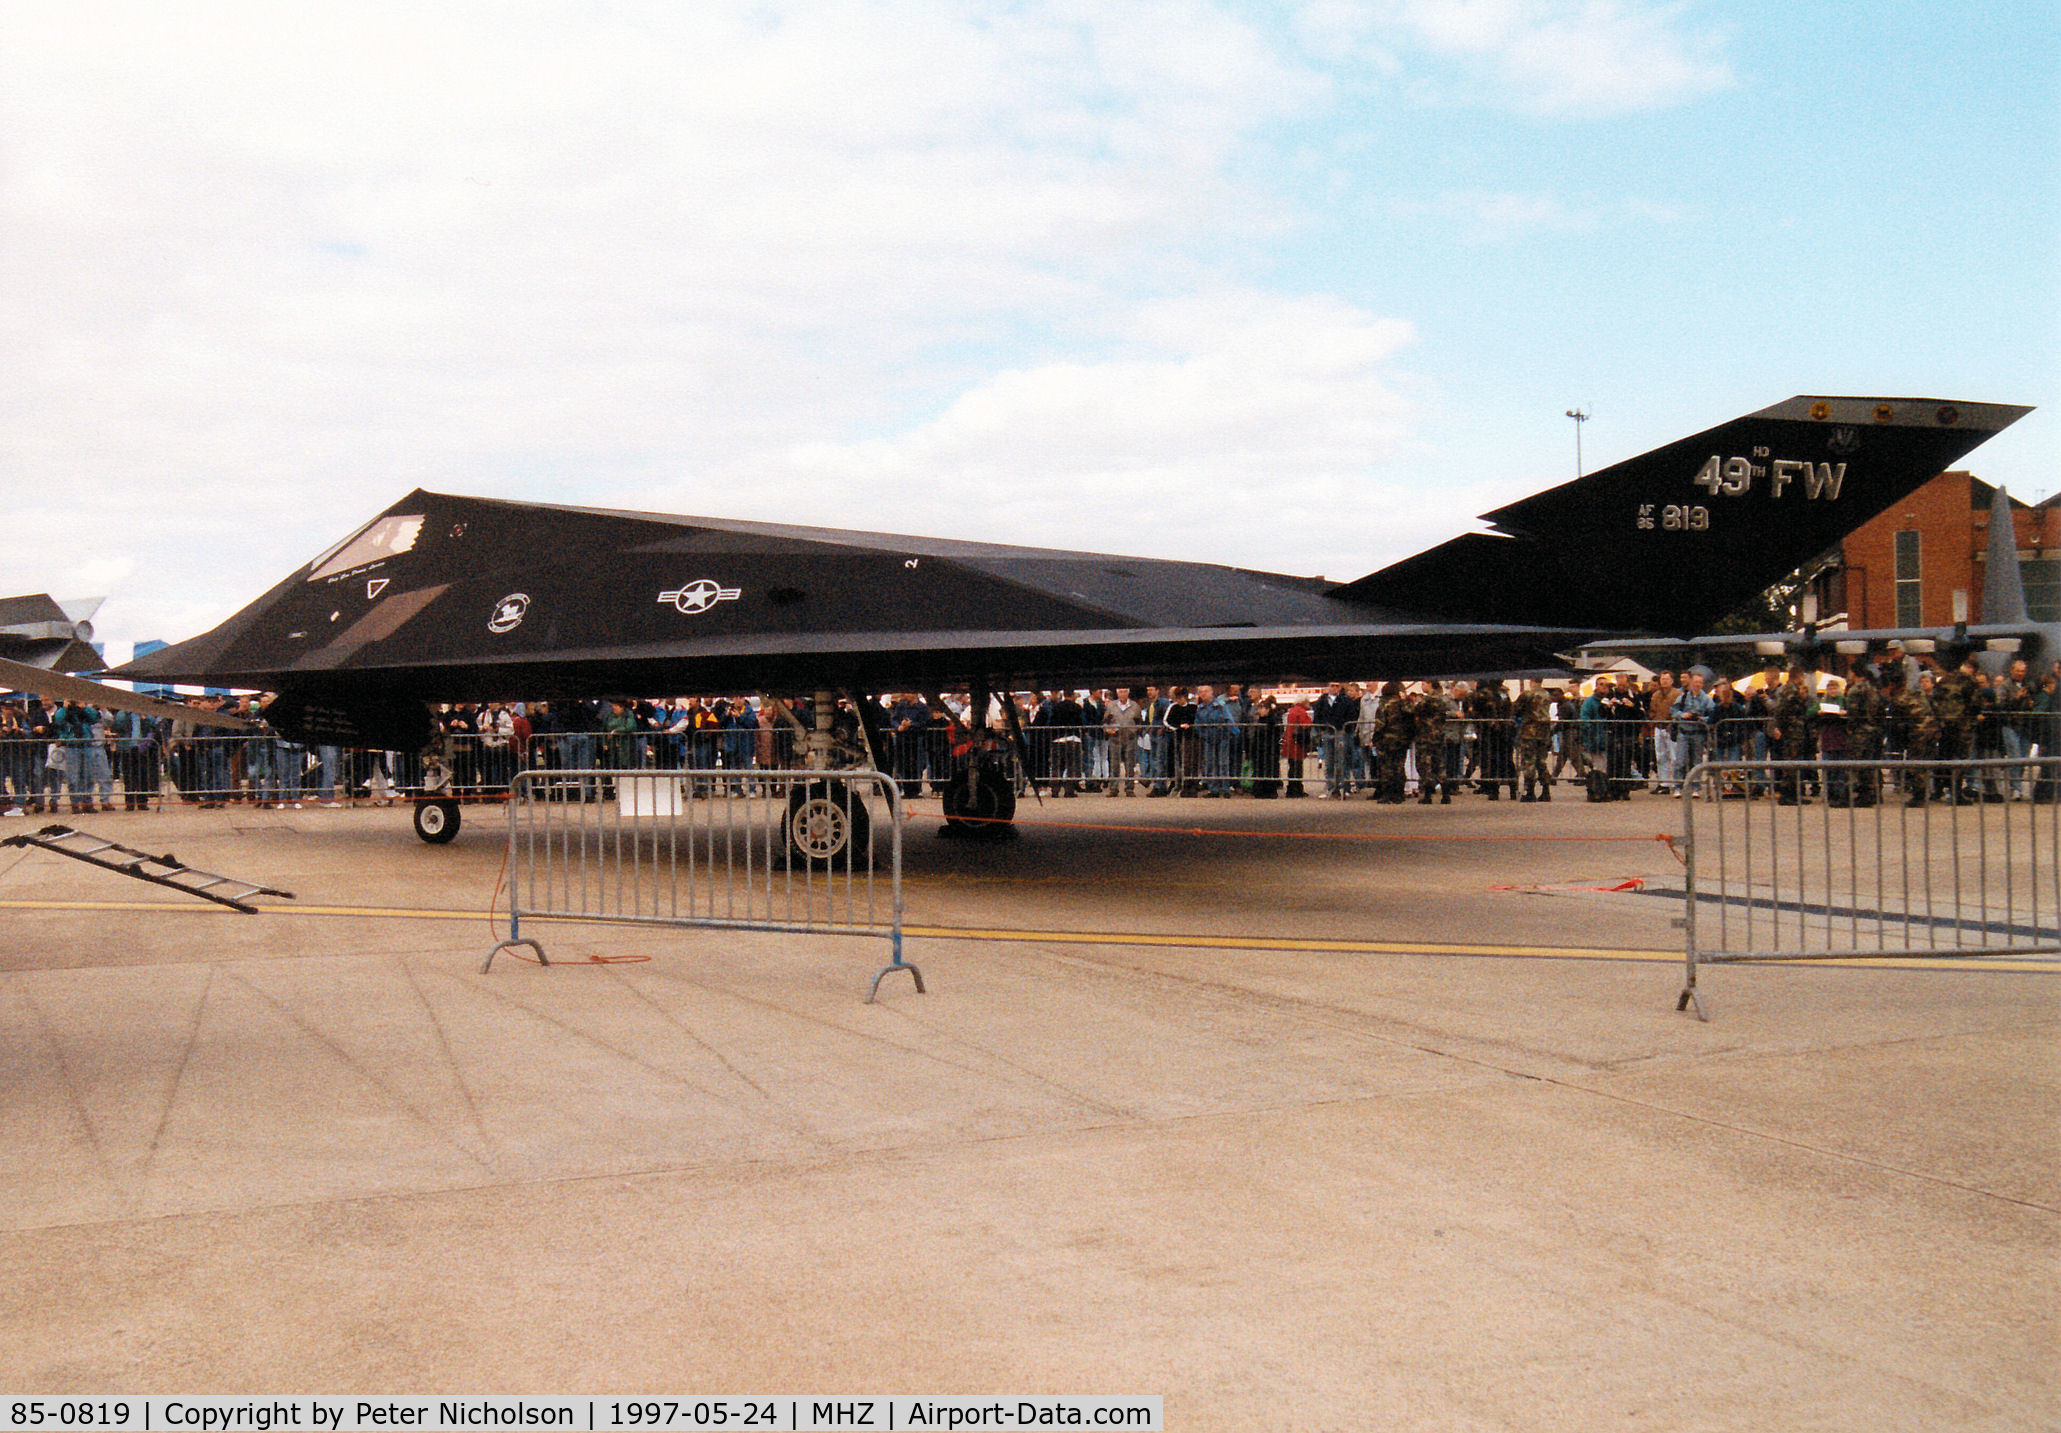 85-0819, 1985 Lockheed F-117A Nighthawk C/N A.4049, Another view of the F-117A Nighthawk, callsign Trend 71, of 7th Fighter Squadron/49th Fighter Wing at Holloman AFB on display at the 1997 RAF Mildenhall Air Fete.